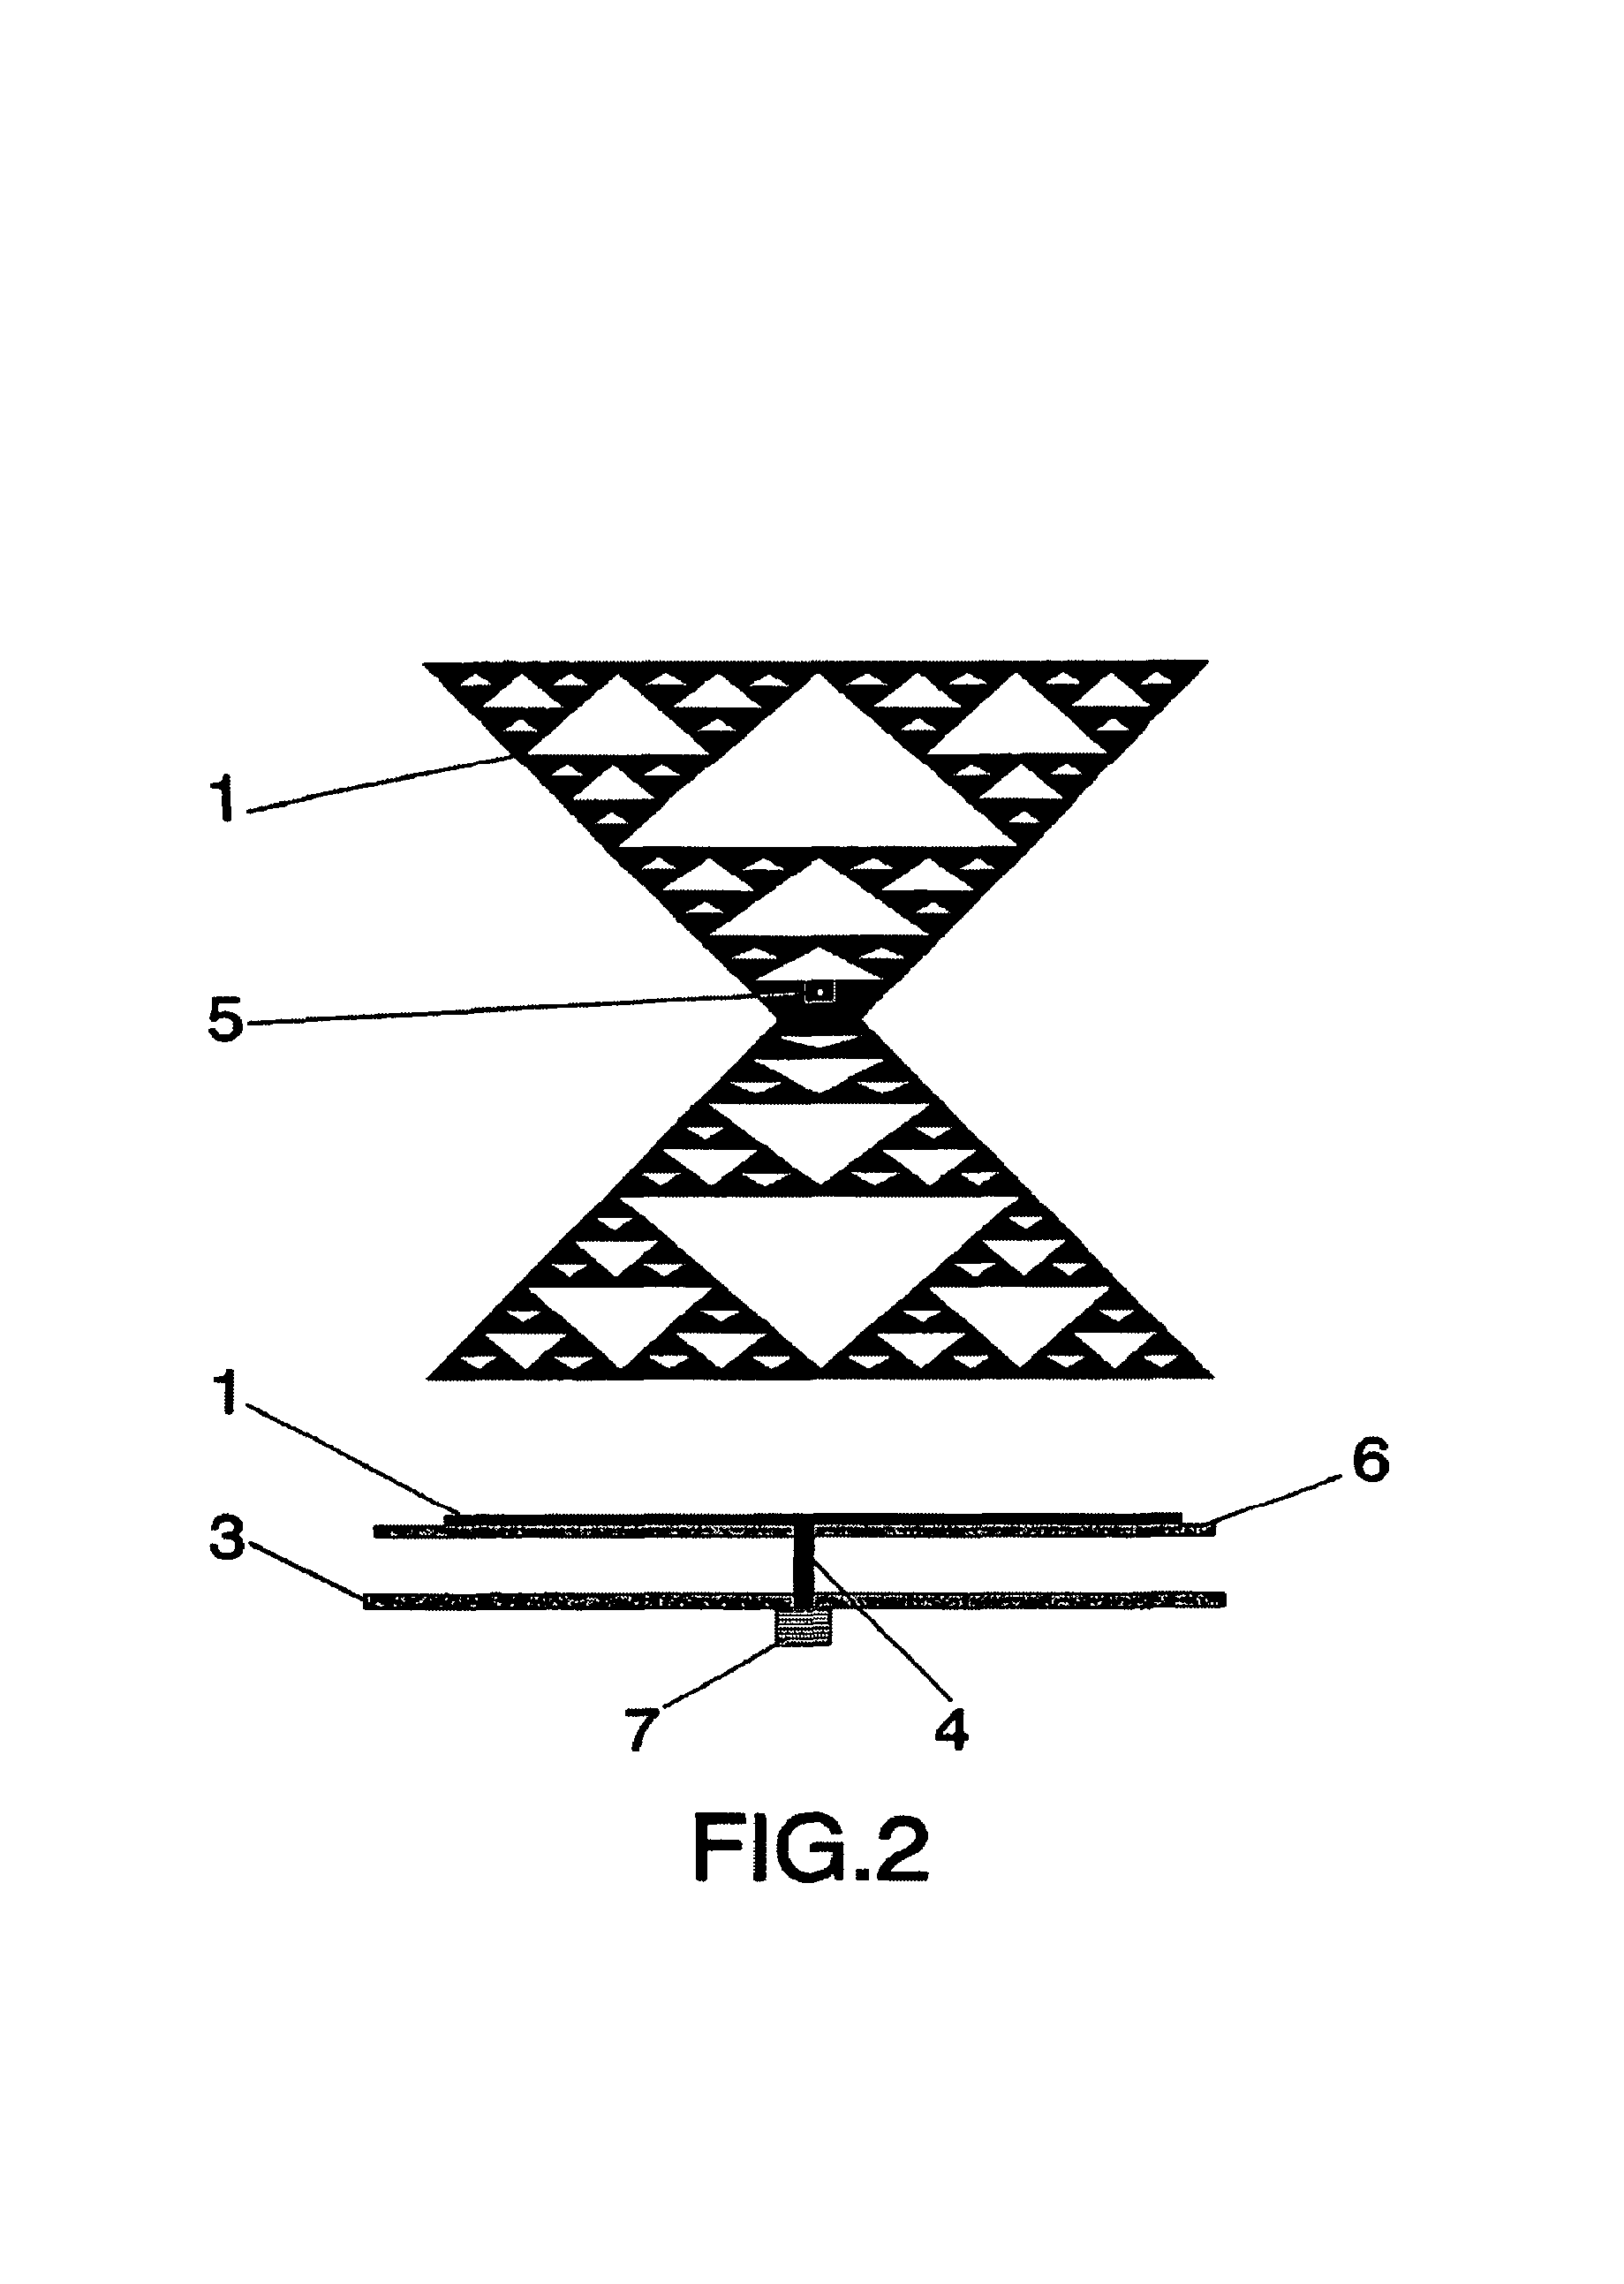 Undersampled microstrip array using multilevel and space-filling shaped elements